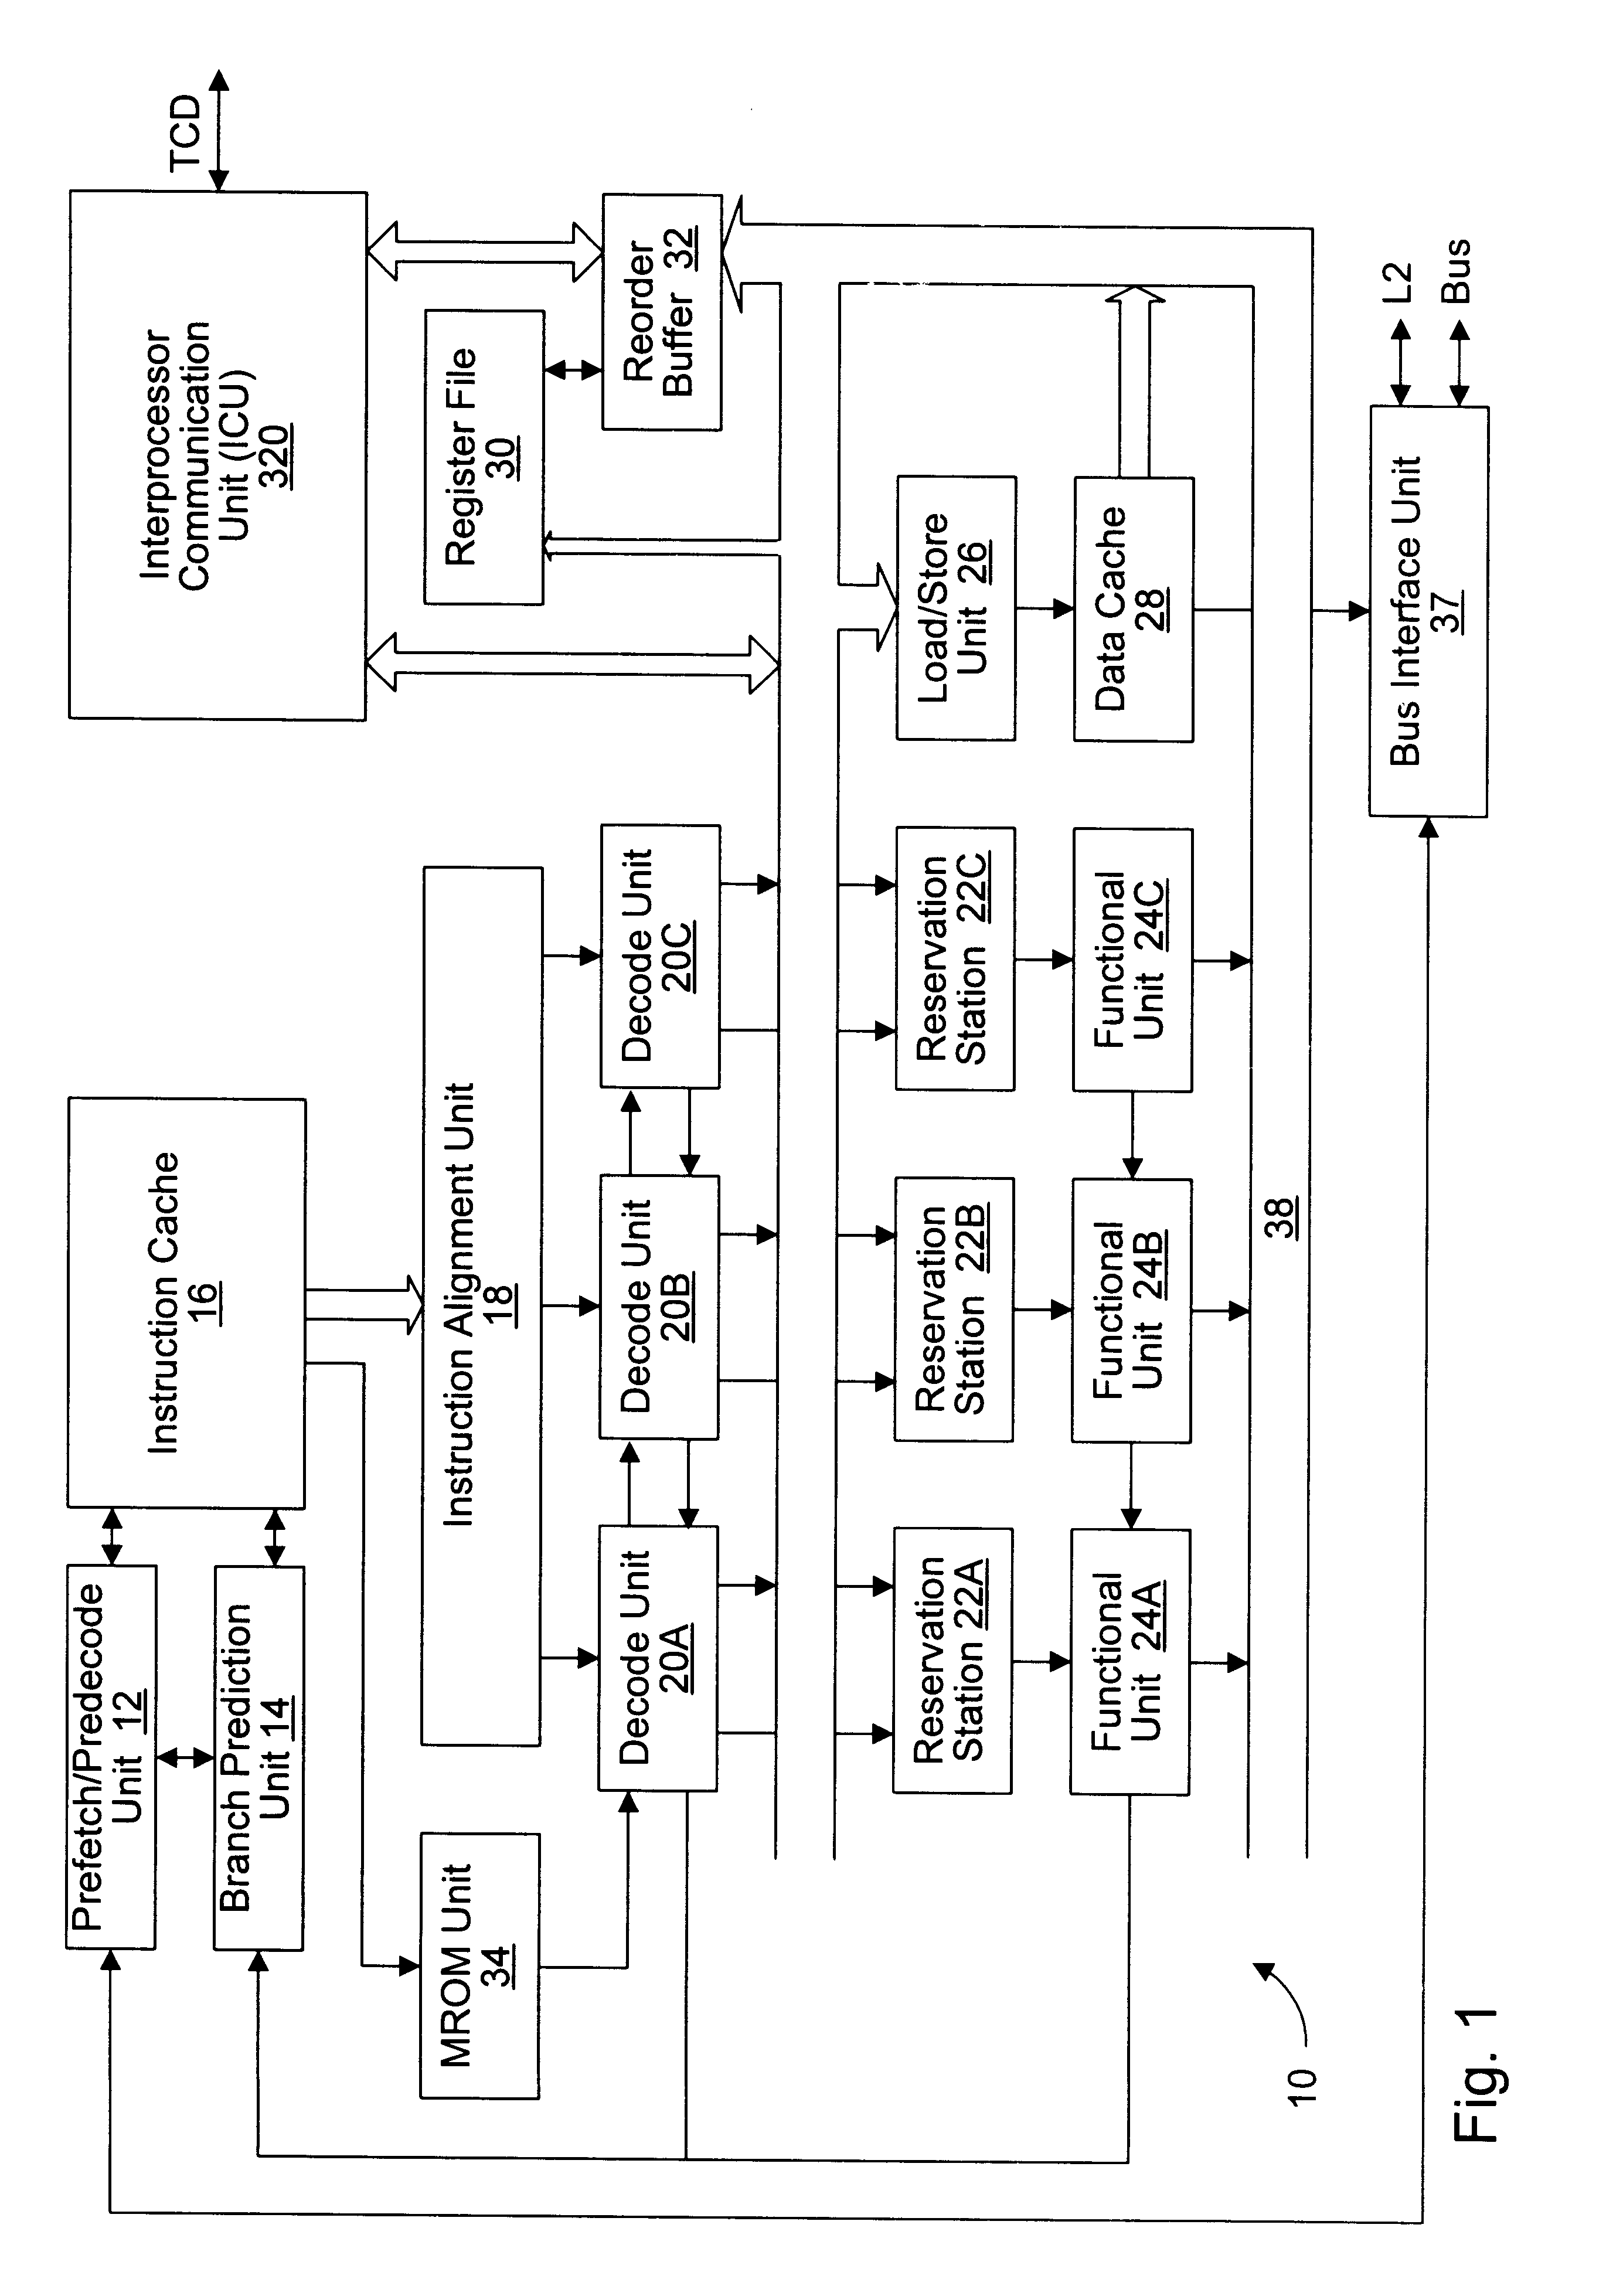 Method and mechanism for speculatively executing threads of instructions